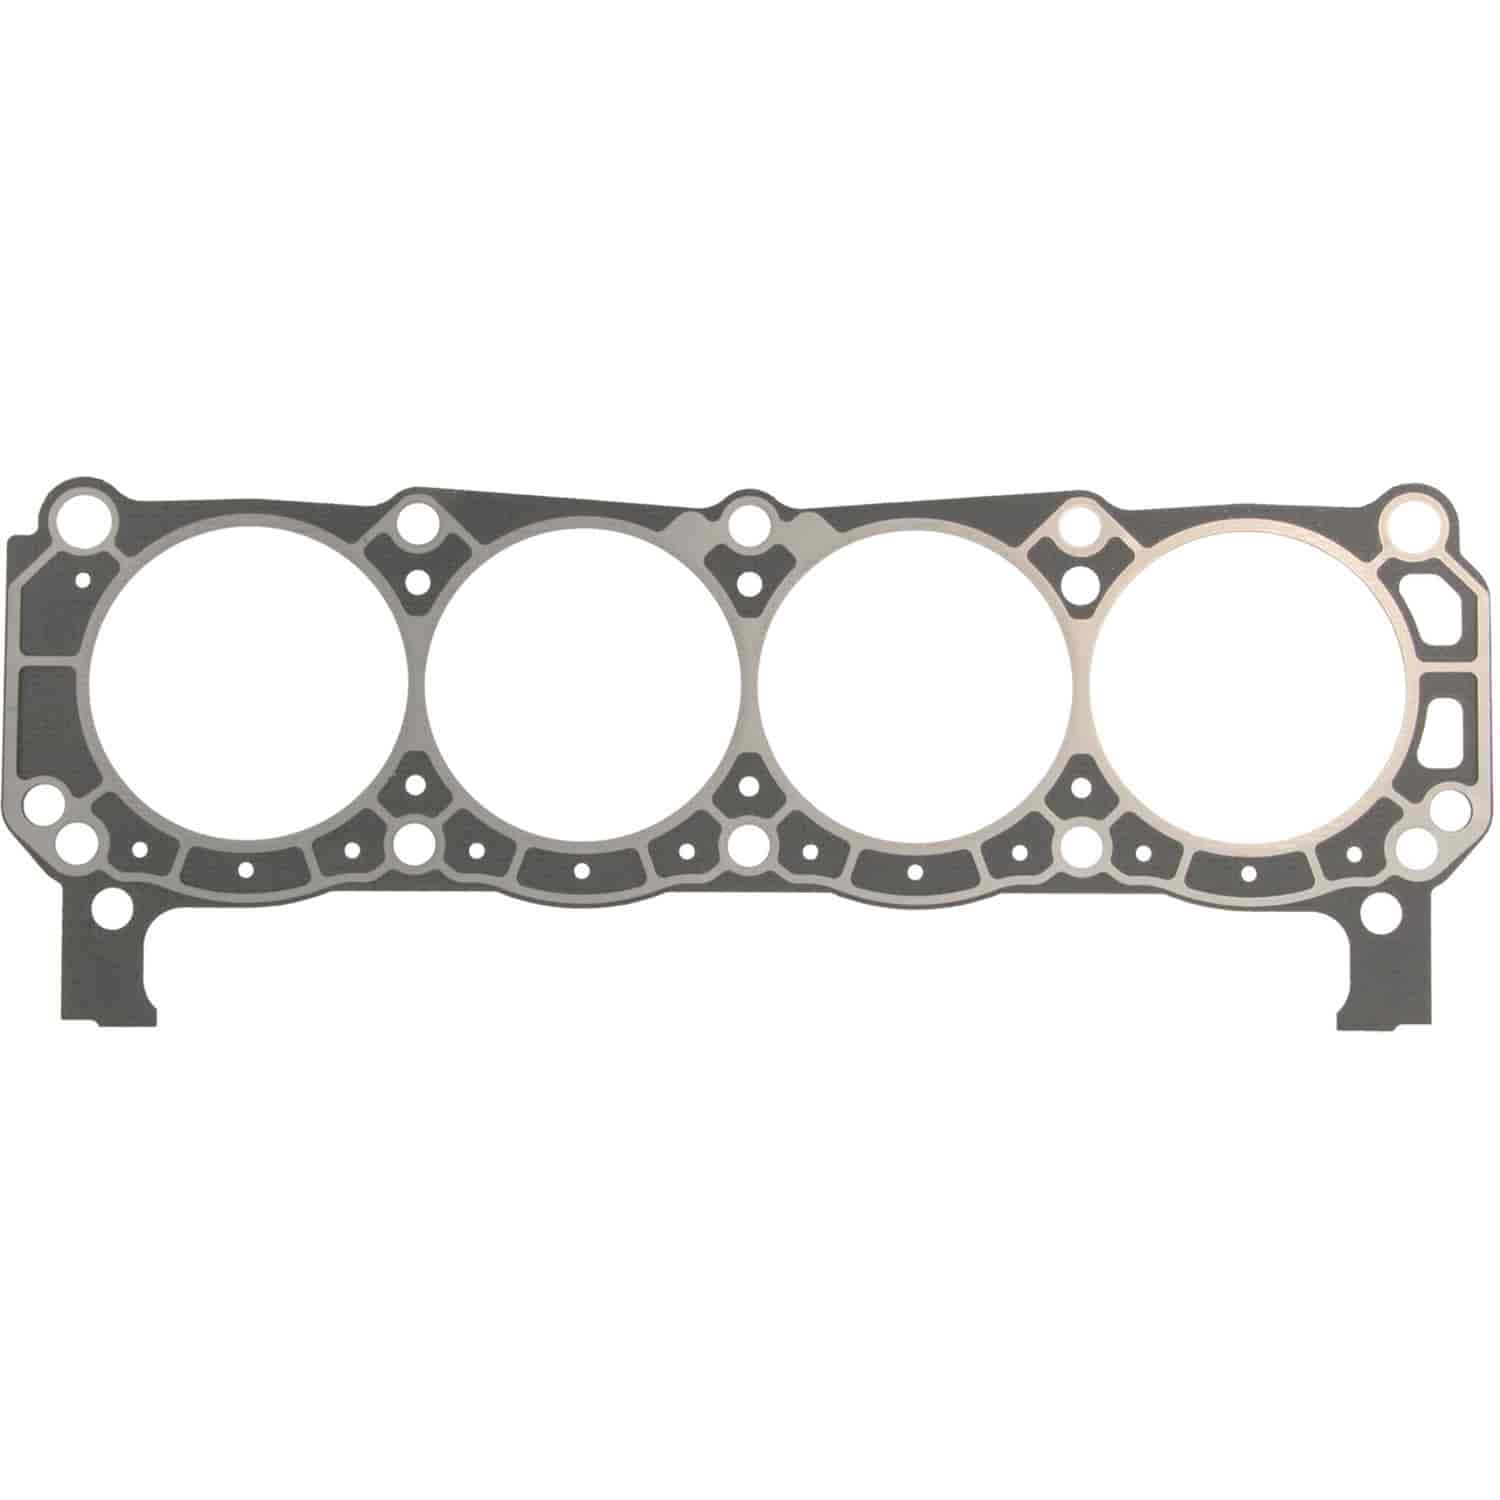 Cylinder Head Gasket Ford 1962-2001 Small Block Ford